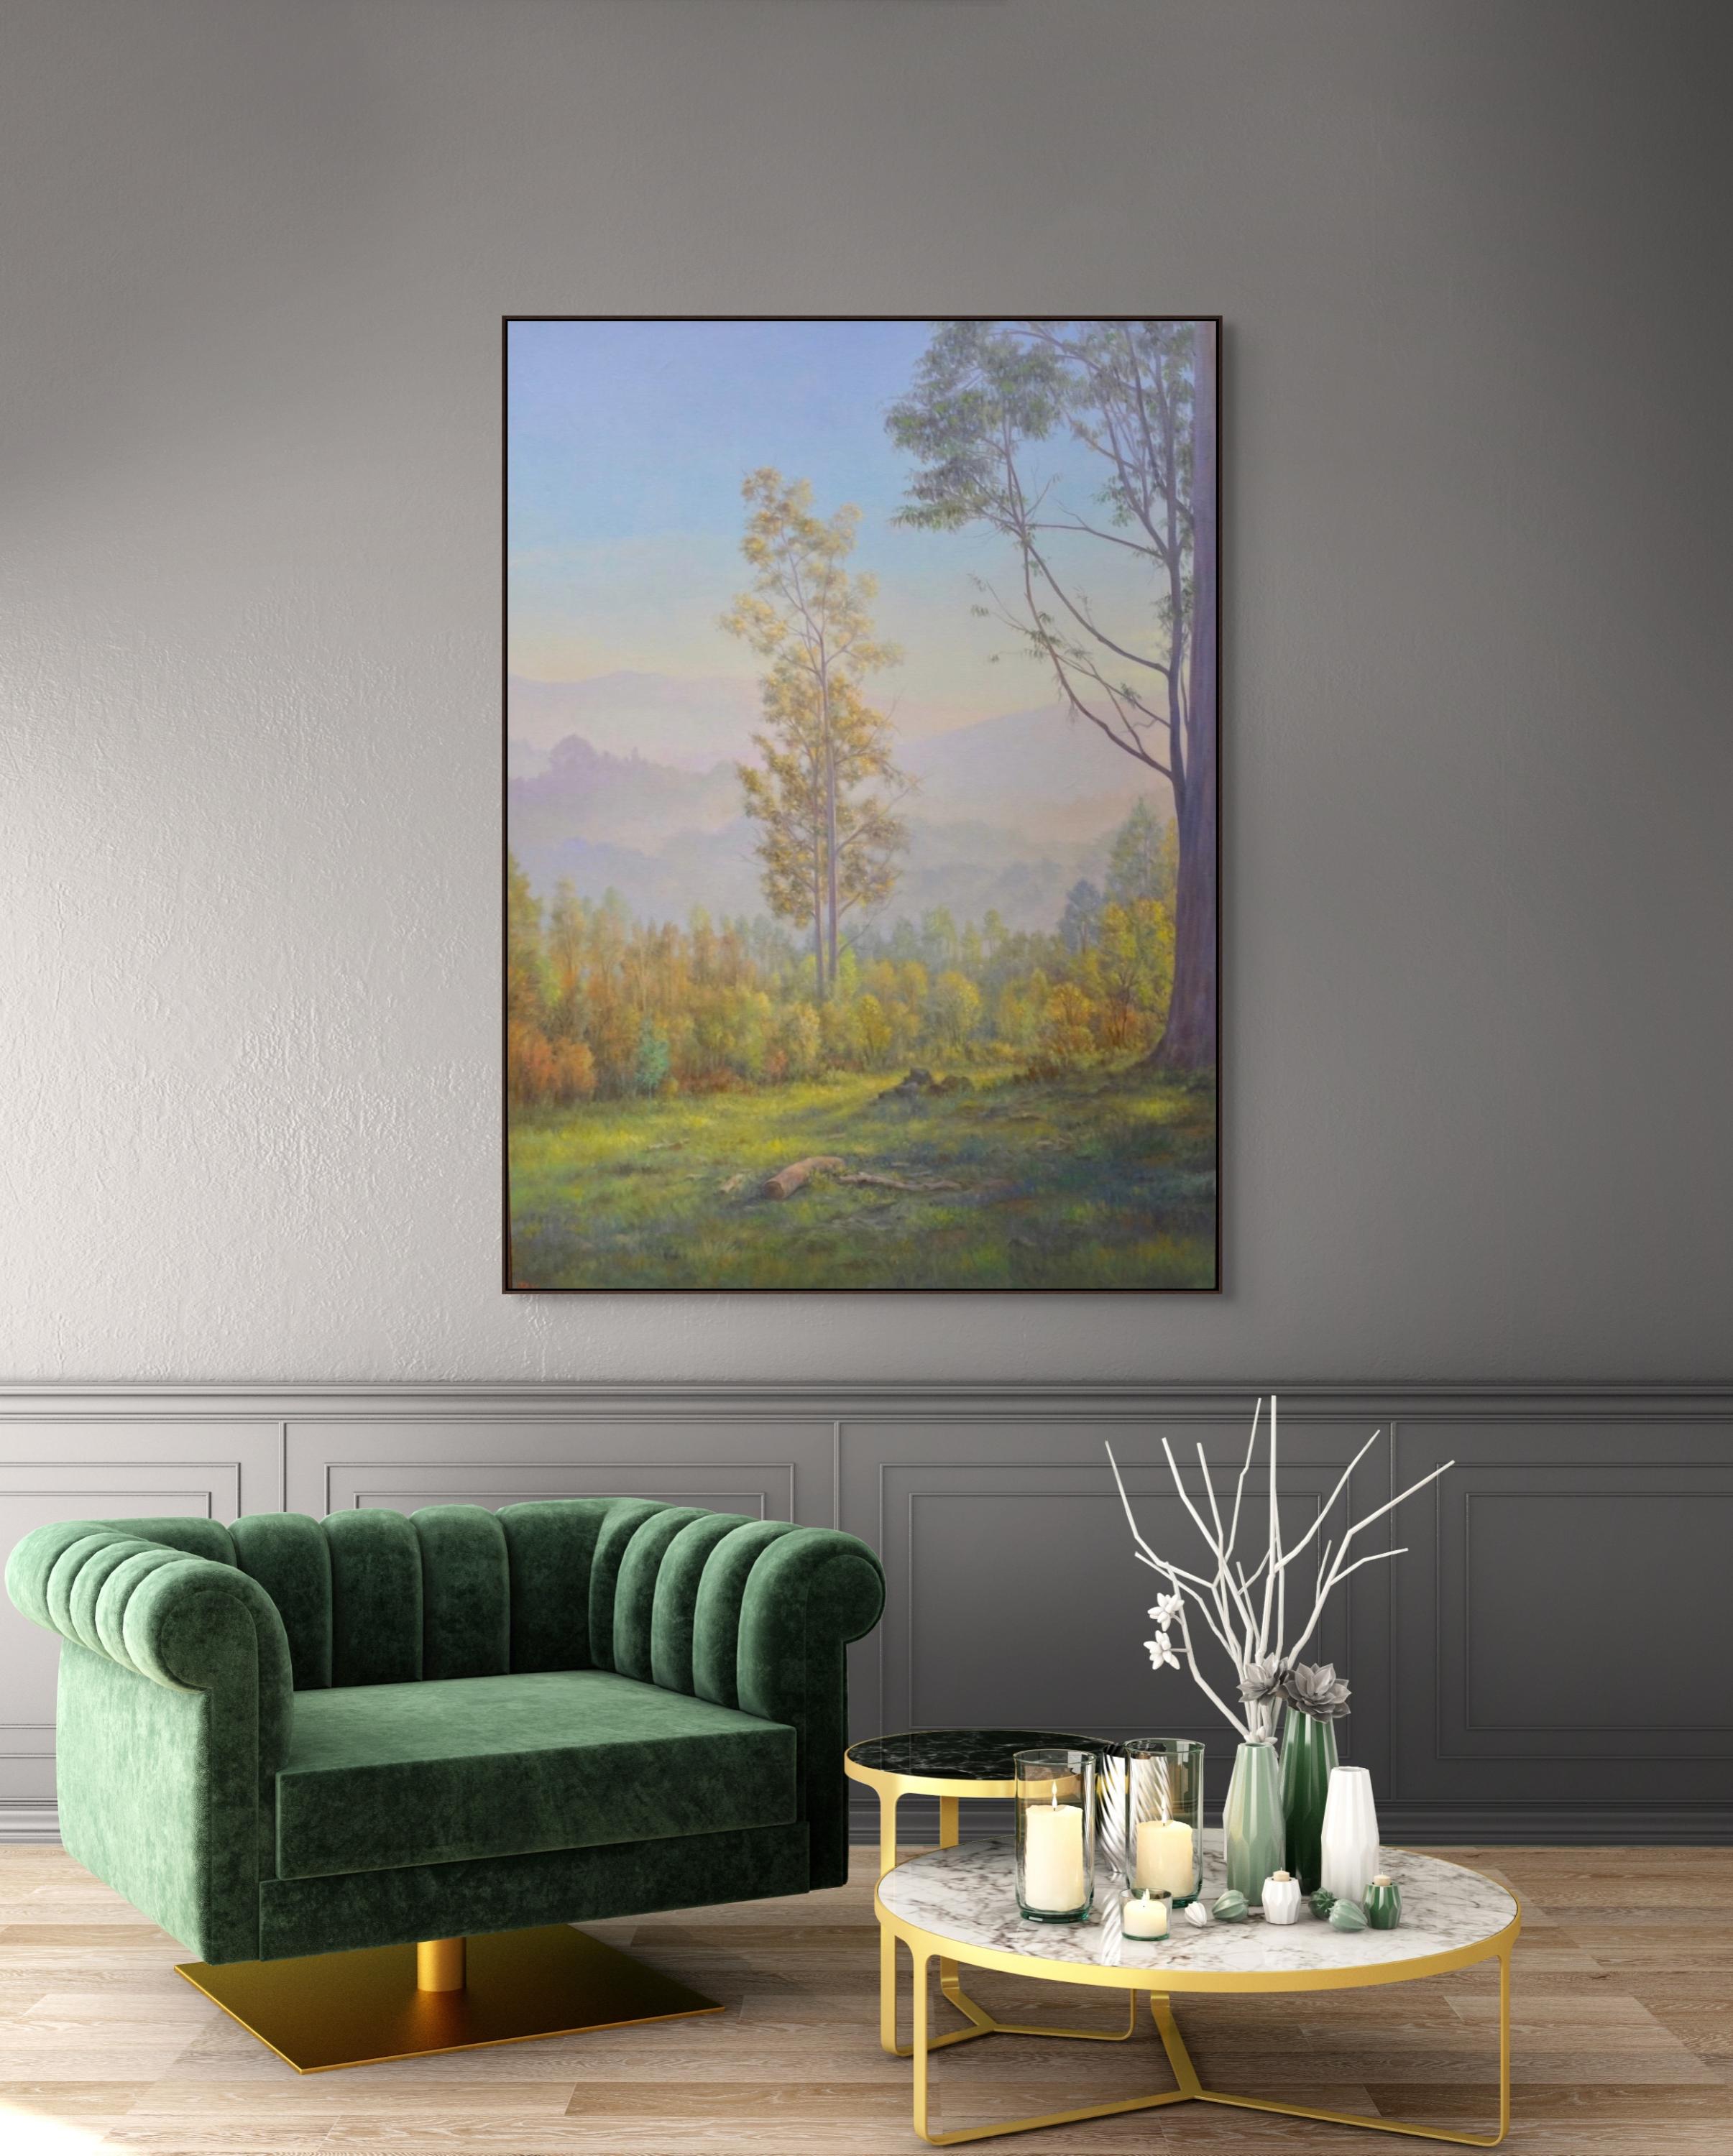 A lone eucalyptus tree stands tall in this vertical atmospheric landscape painting that features sunlit green grass, rolling purple hills and a hazy sky. A stunning work of original art by Willard Dixon, who is one of the finest American